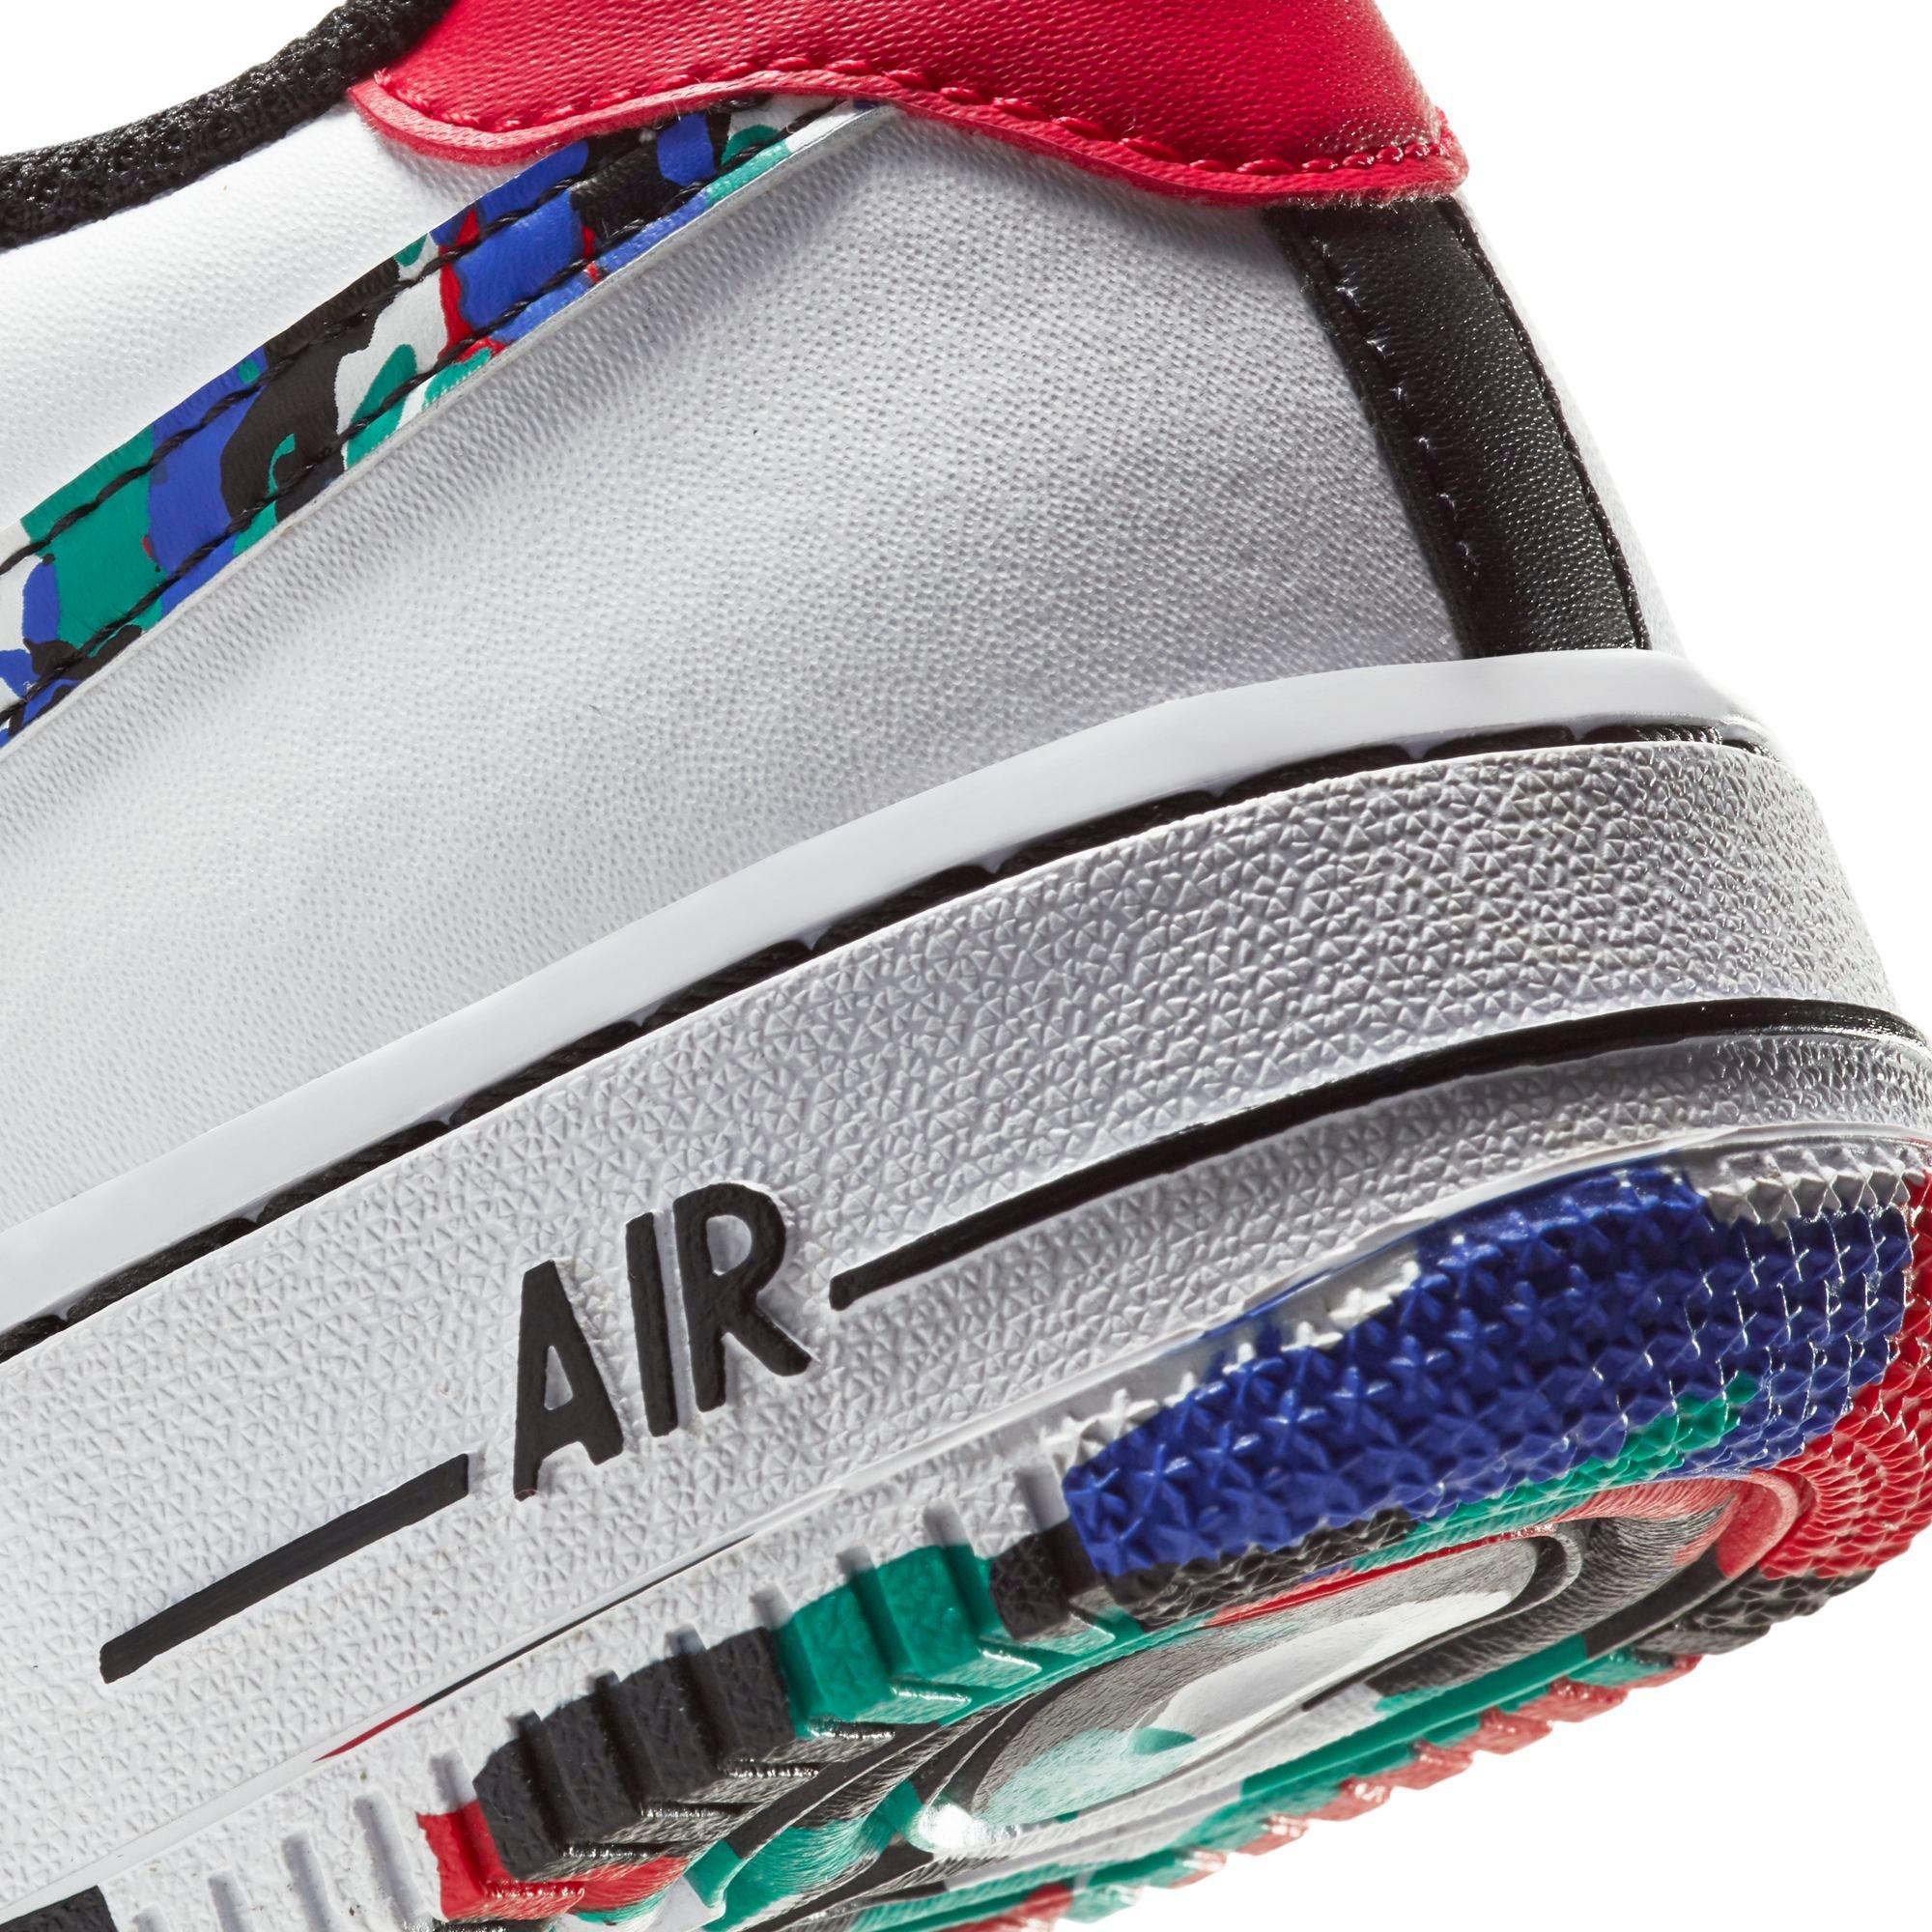 air force 1 melted crayon grade school